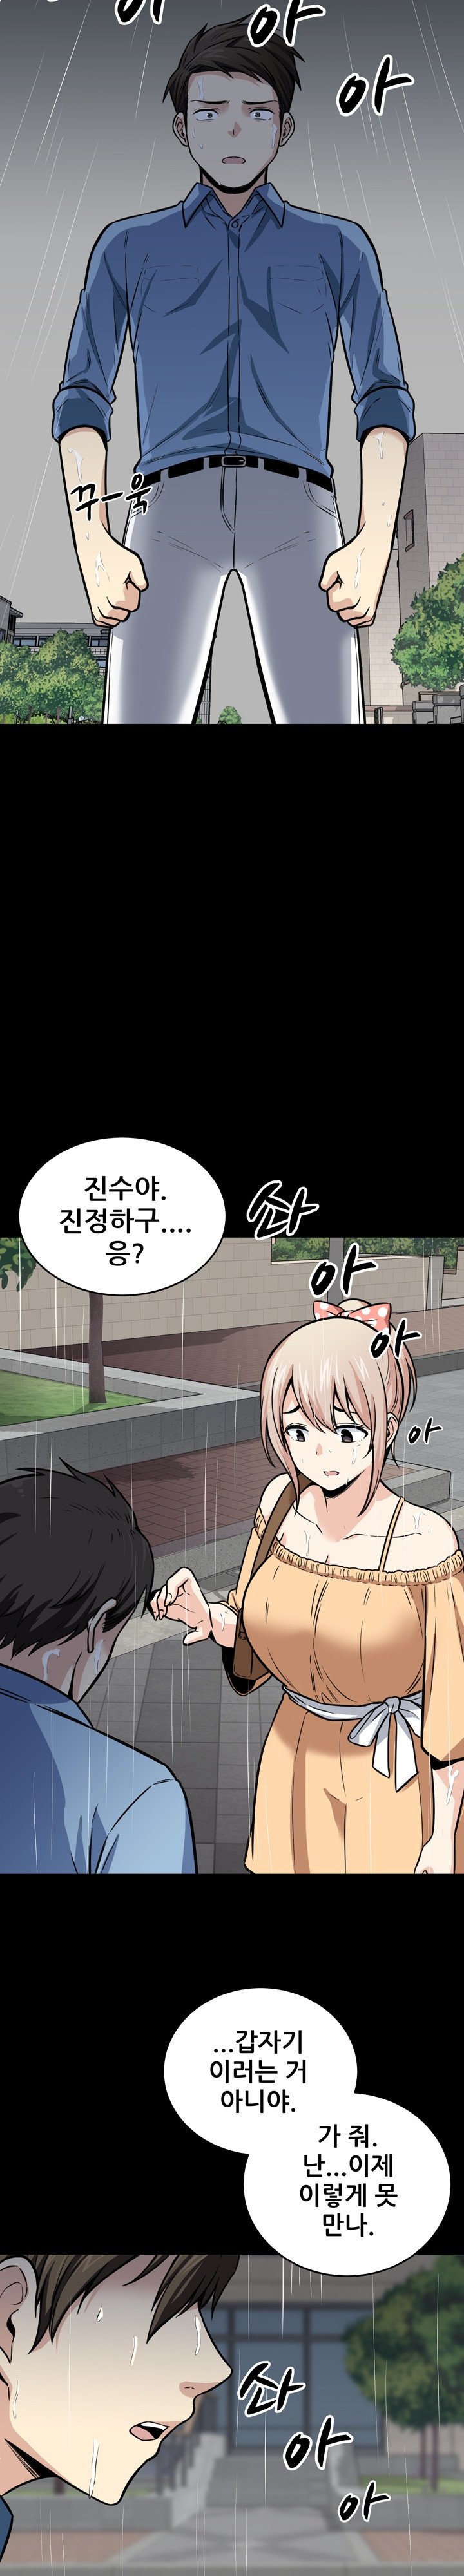 the-ark-is-me-raw-chap-38-1